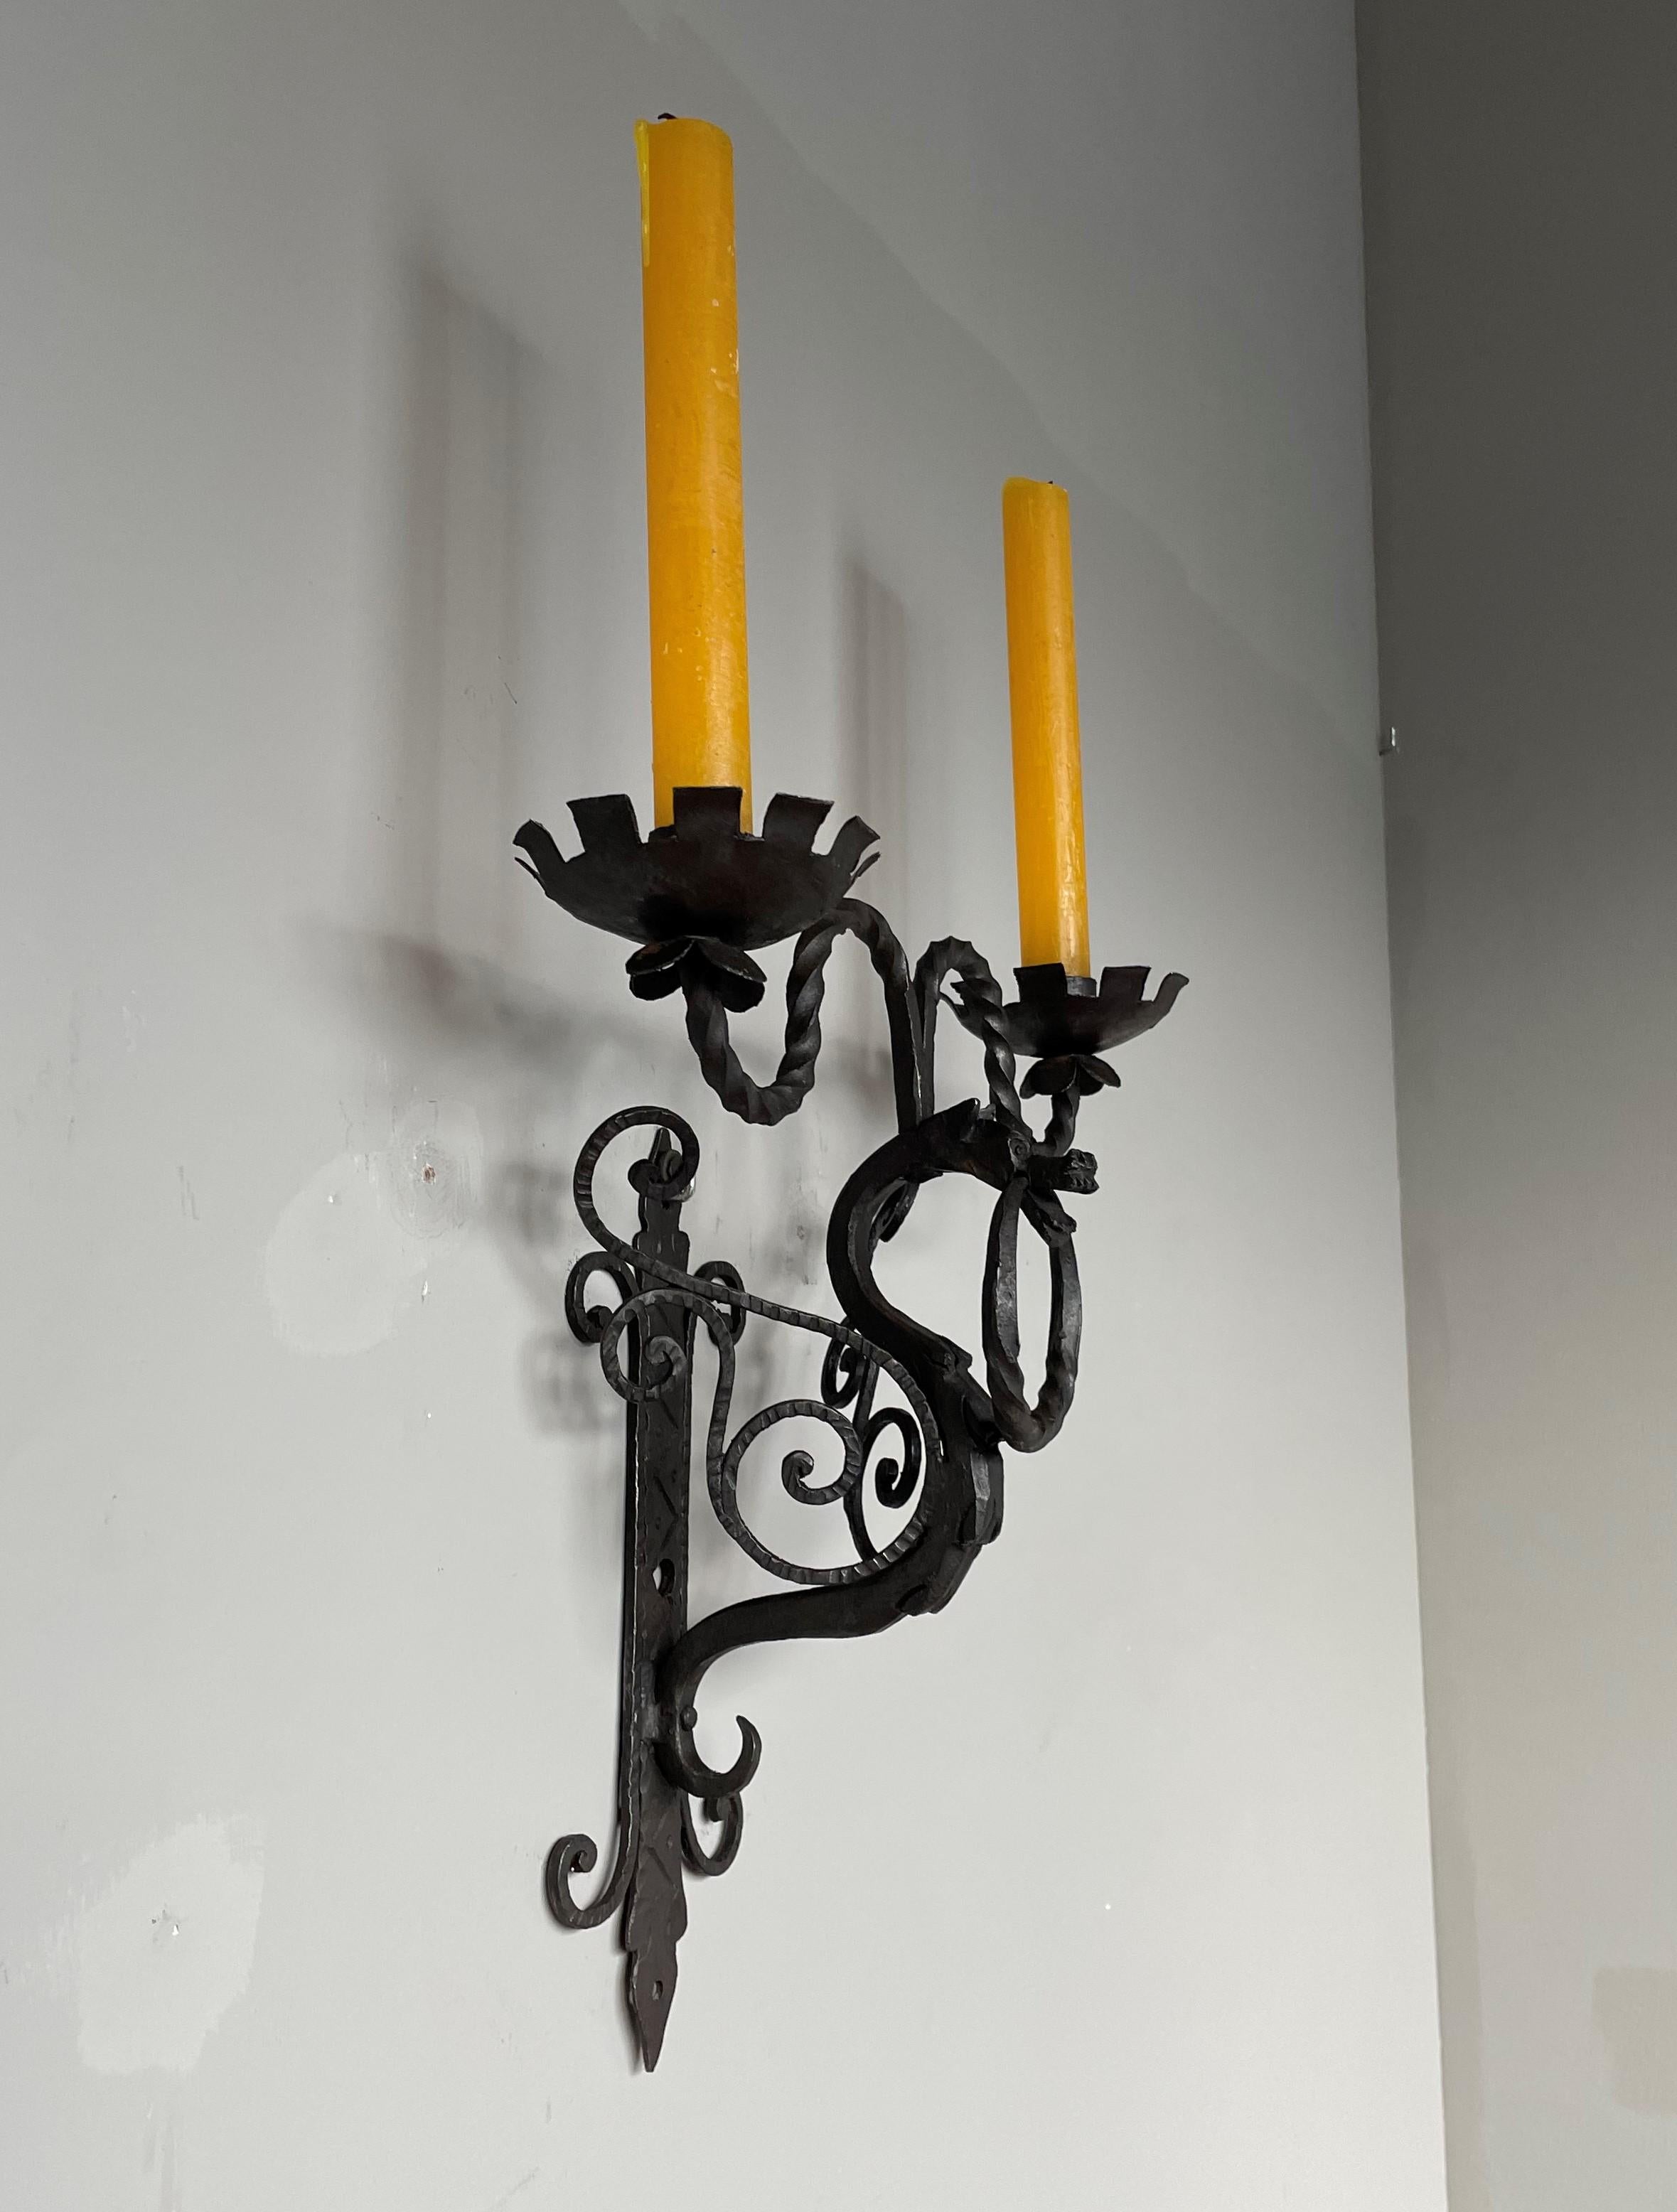 Rare Set of 7 Antique Wrought Iron Gothic Revival Dragon Sculpture Wall Sconces For Sale 10